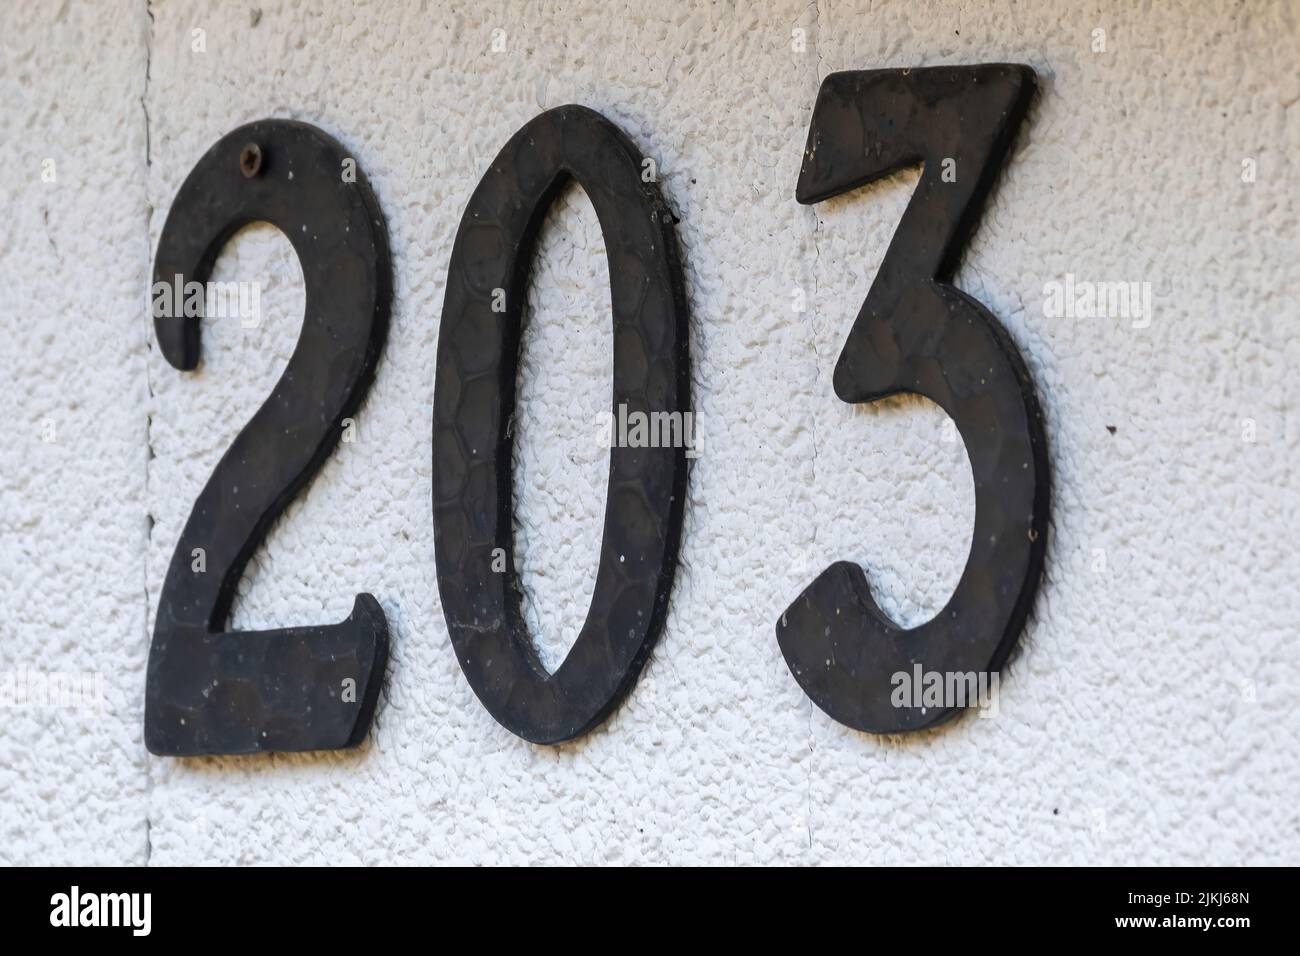 A closeup of house number 203 on white concrete wall Stock Photo